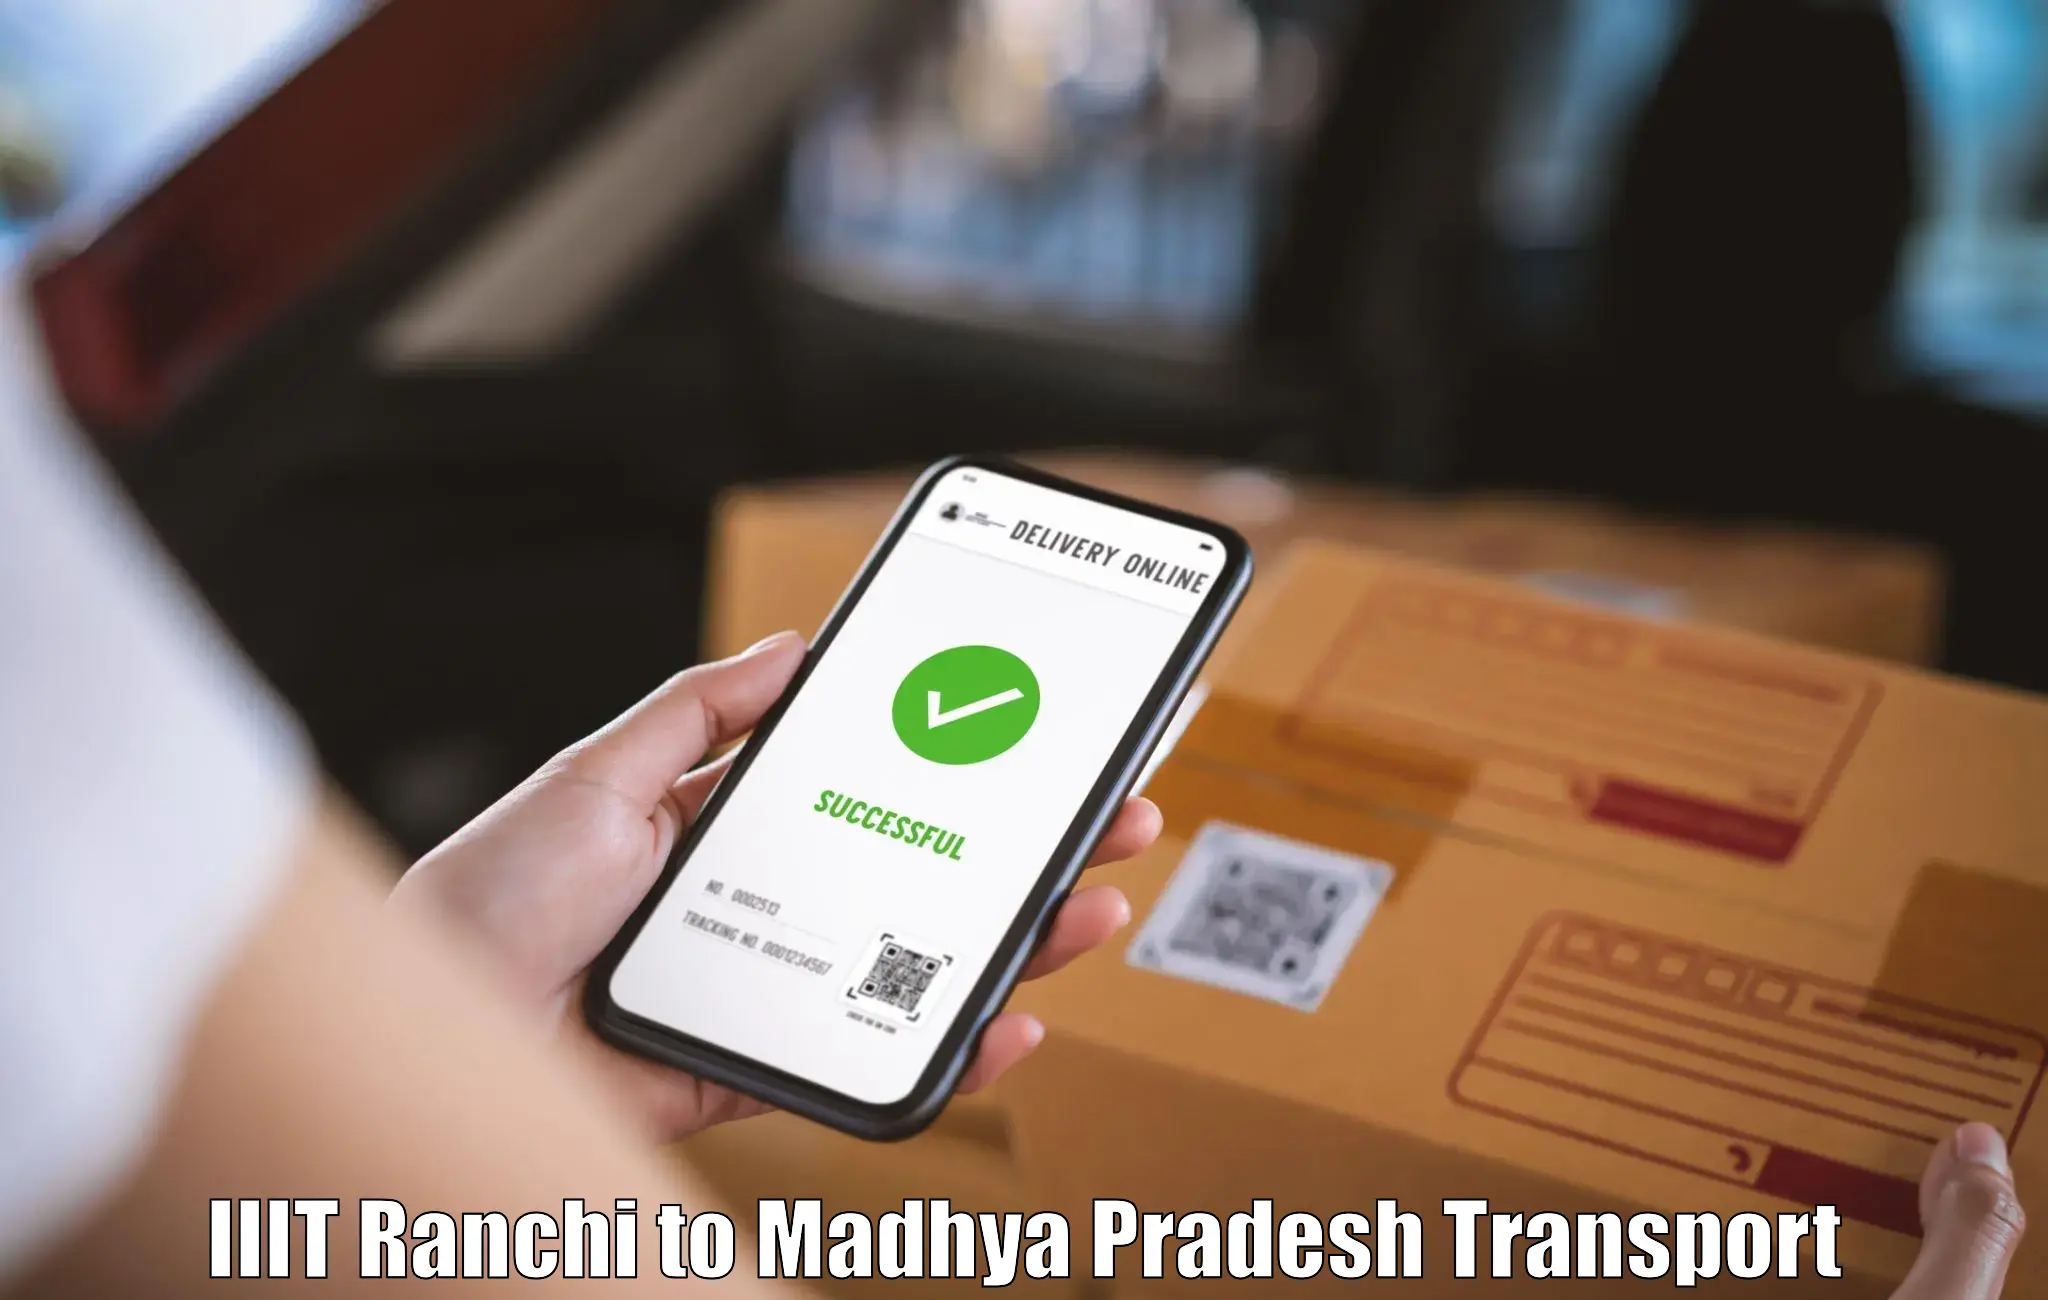 Pick up transport service IIIT Ranchi to Sidhi